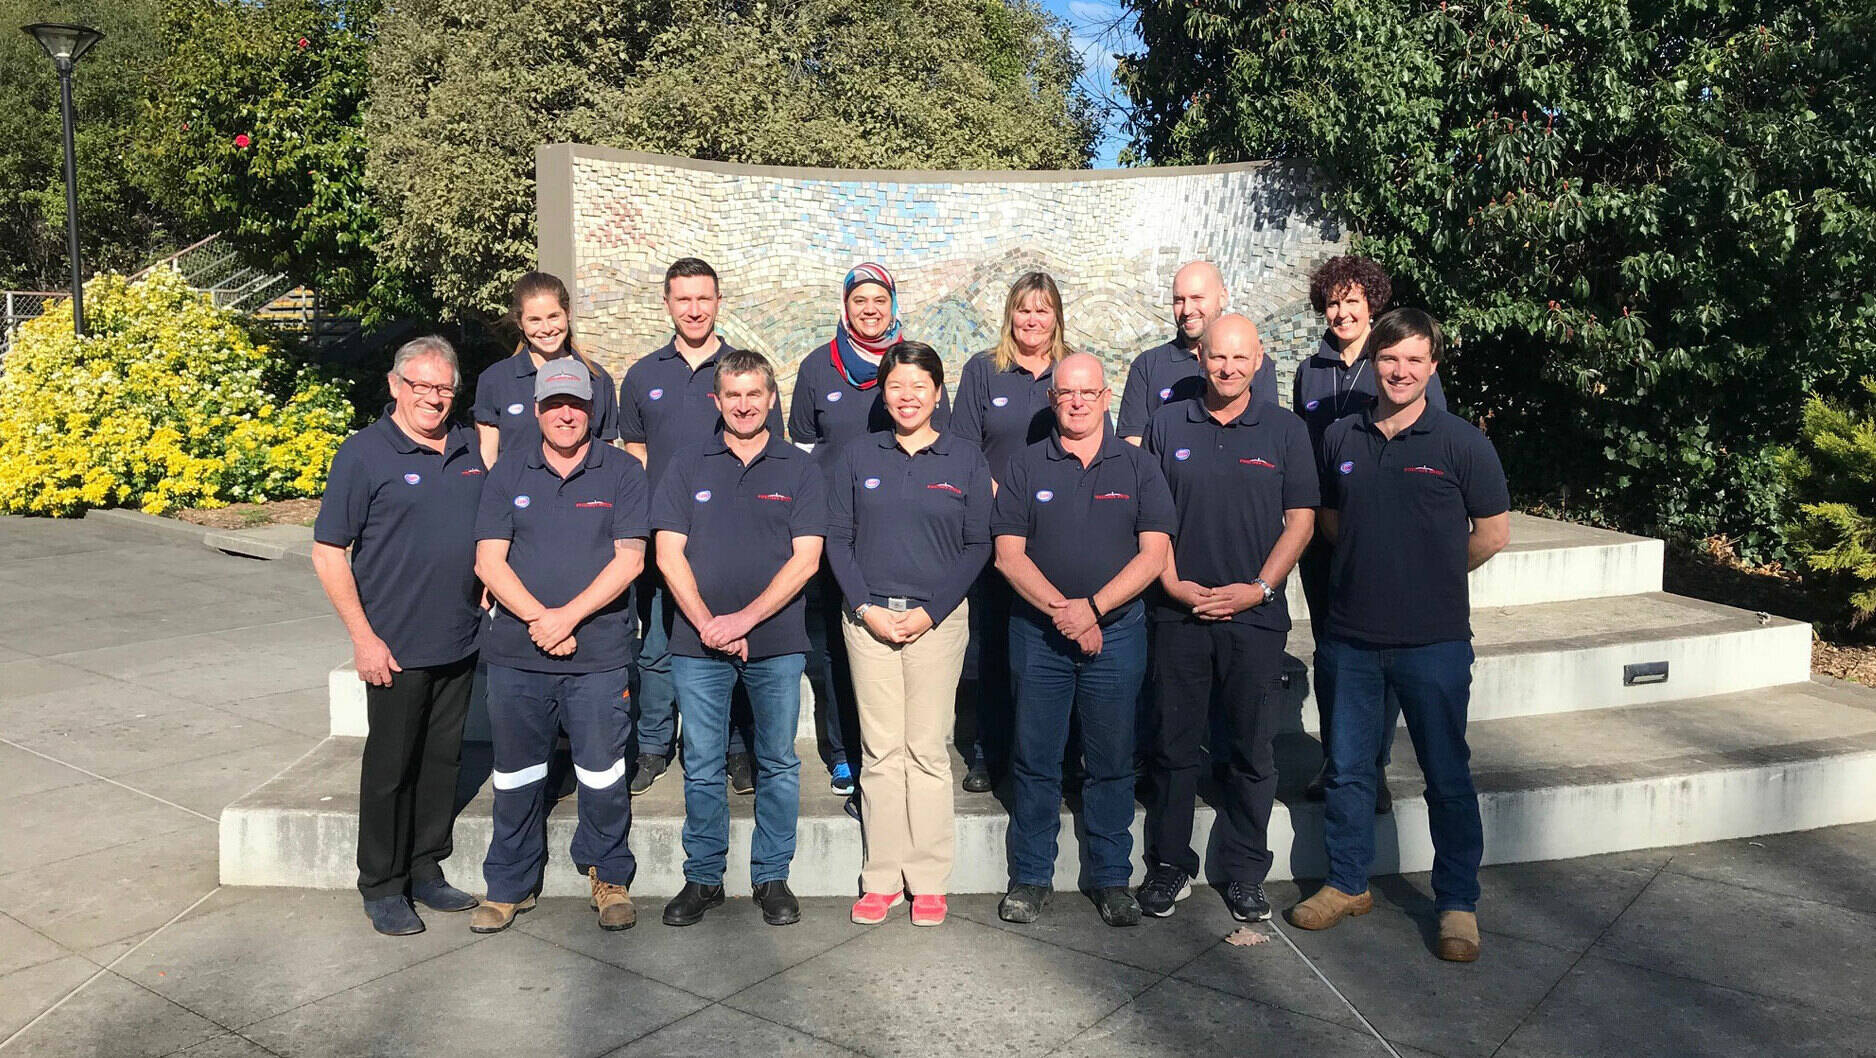 Image Photo — The pipelines team pictured in 2018.